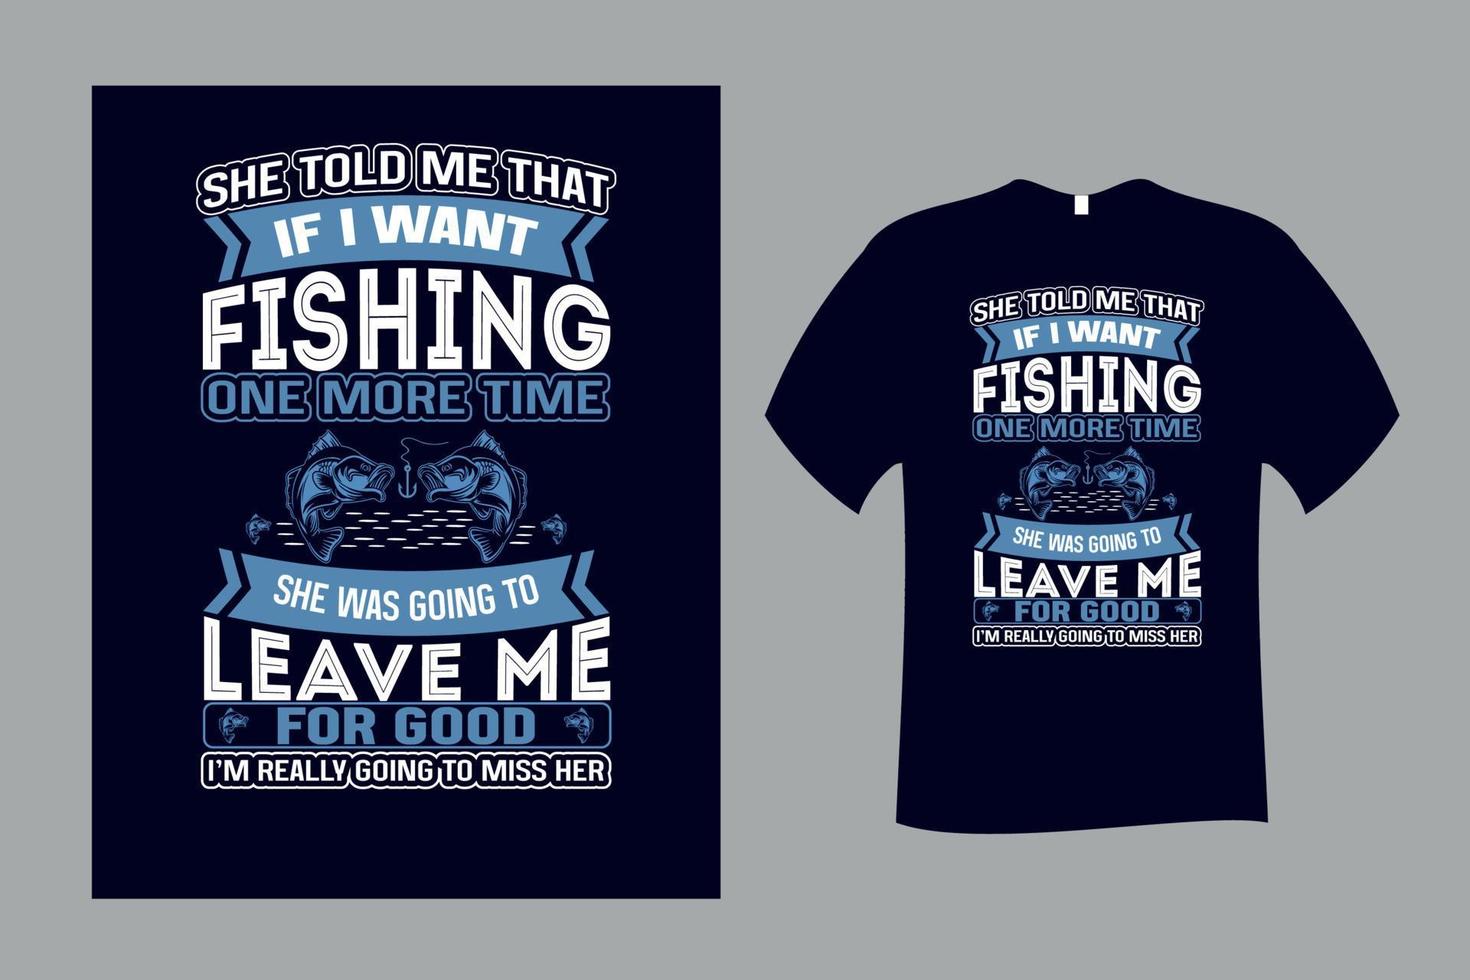 https://static.vecteezy.com/system/resources/previews/005/448/542/non_2x/she-told-me-that-if-i-want-fishing-t-shirt-design-vector.jpg